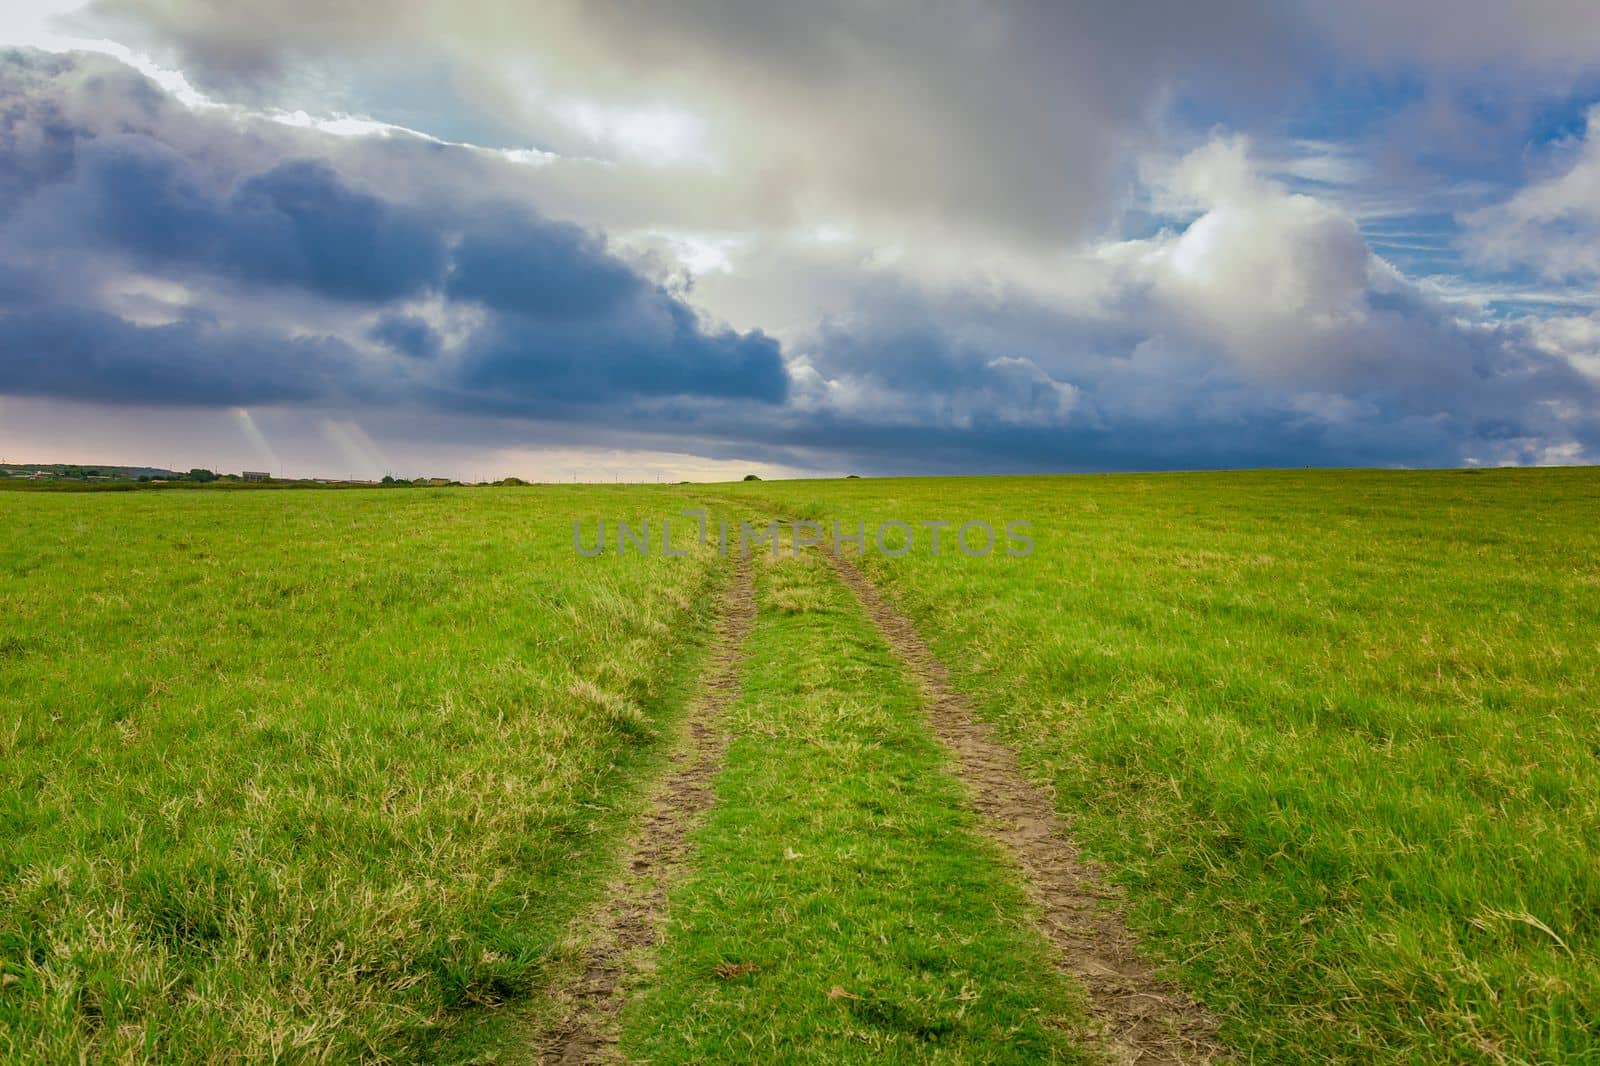 Landscape of a green path with clouds and blue sky in the background. Green country road with clouds in the background. Idyllic view of rural road between green fields with blue sky and clouds by isaiphoto